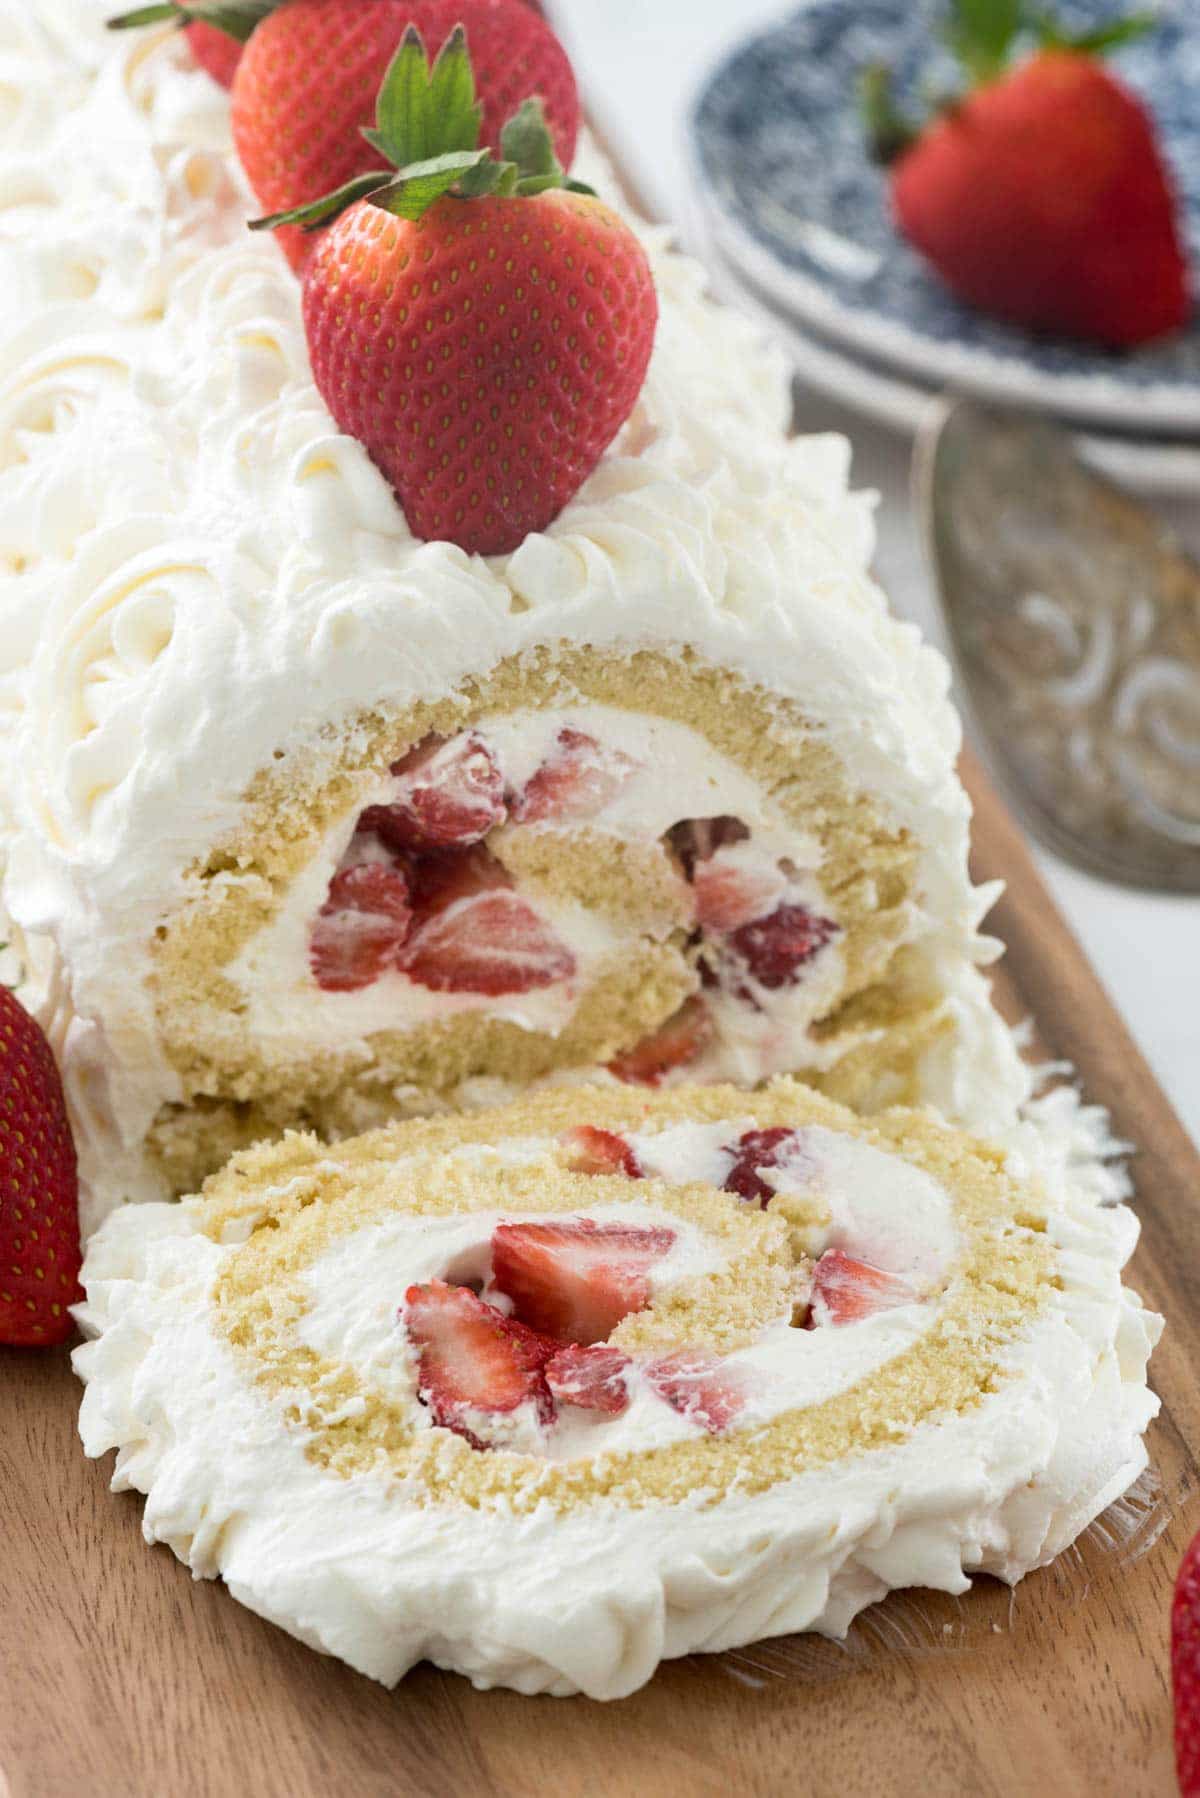 Strawberry Shortcake Cake Roll - this easy strawberry shortcake filled with cream cheese whipped cream! Everyone loves this easy cake recipe.